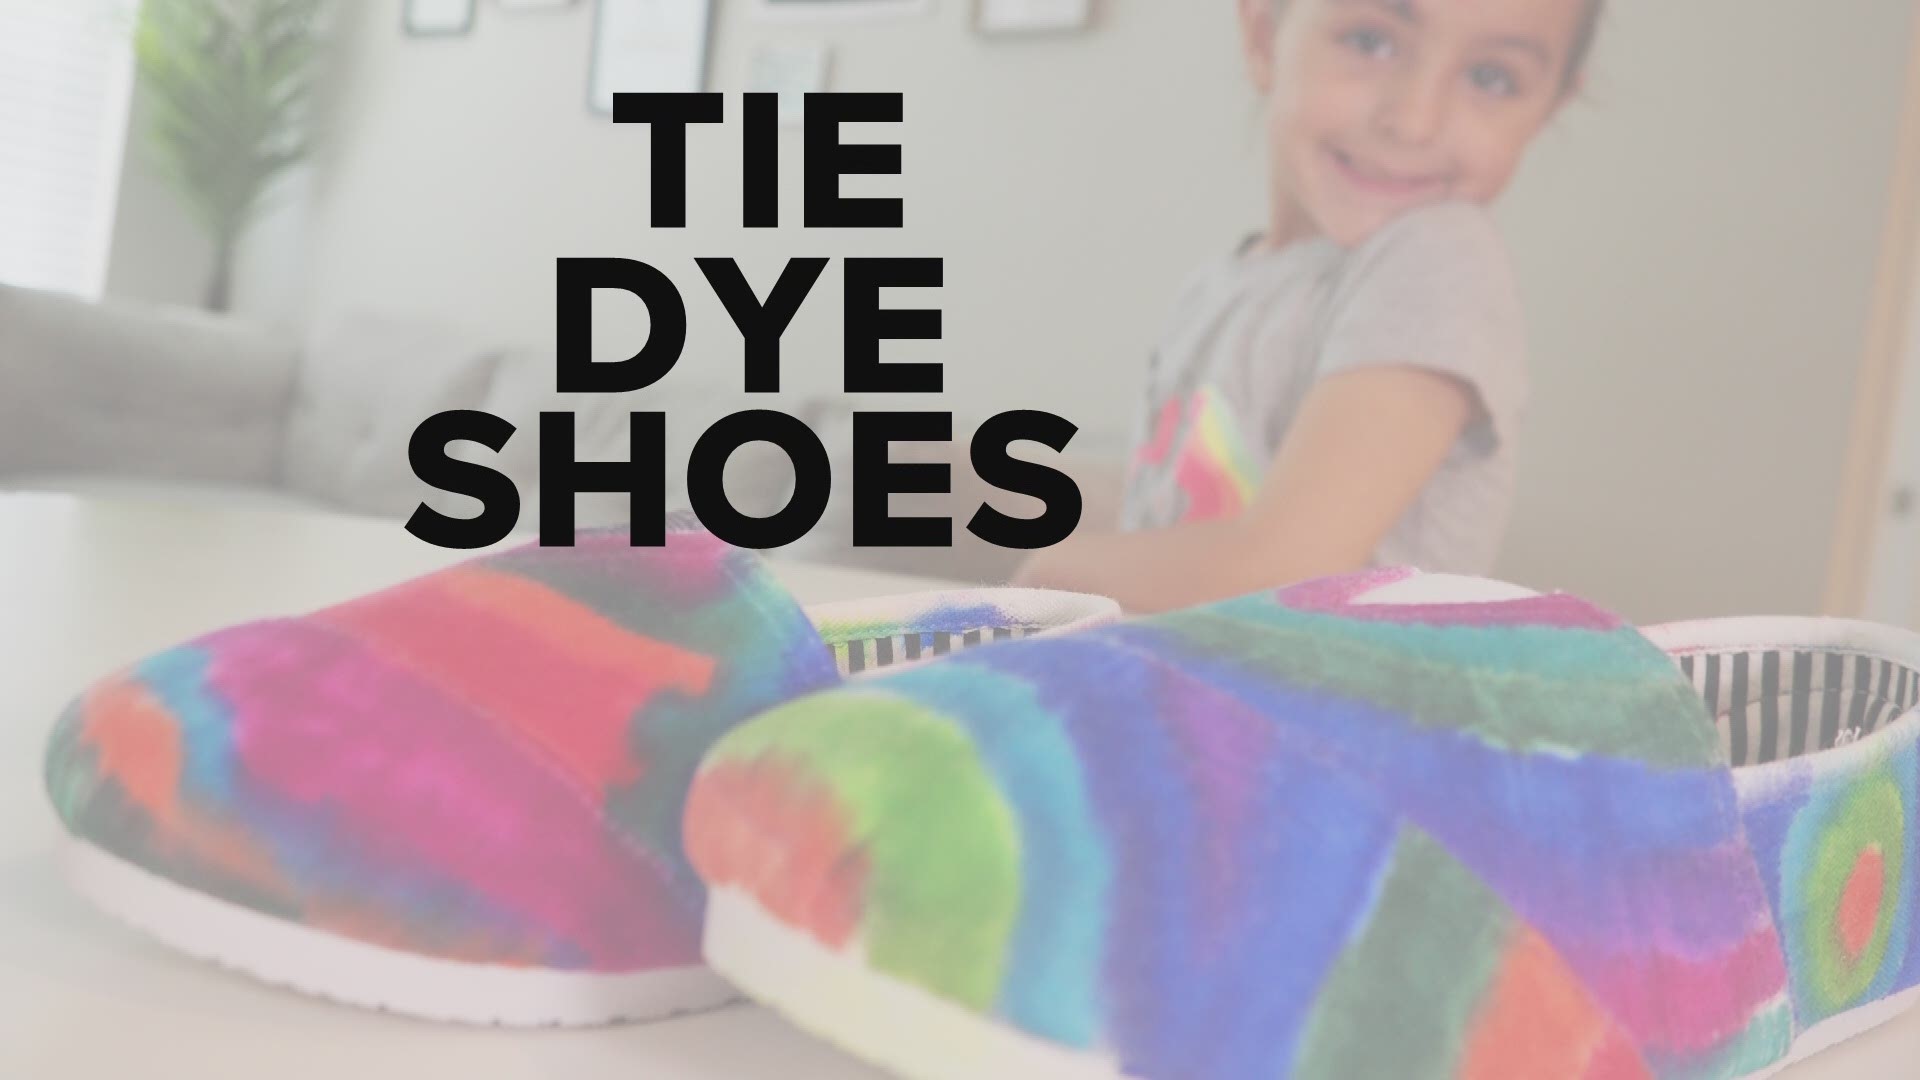 Here's how to make your shoes look like they were tie-dyed in two easy steps!